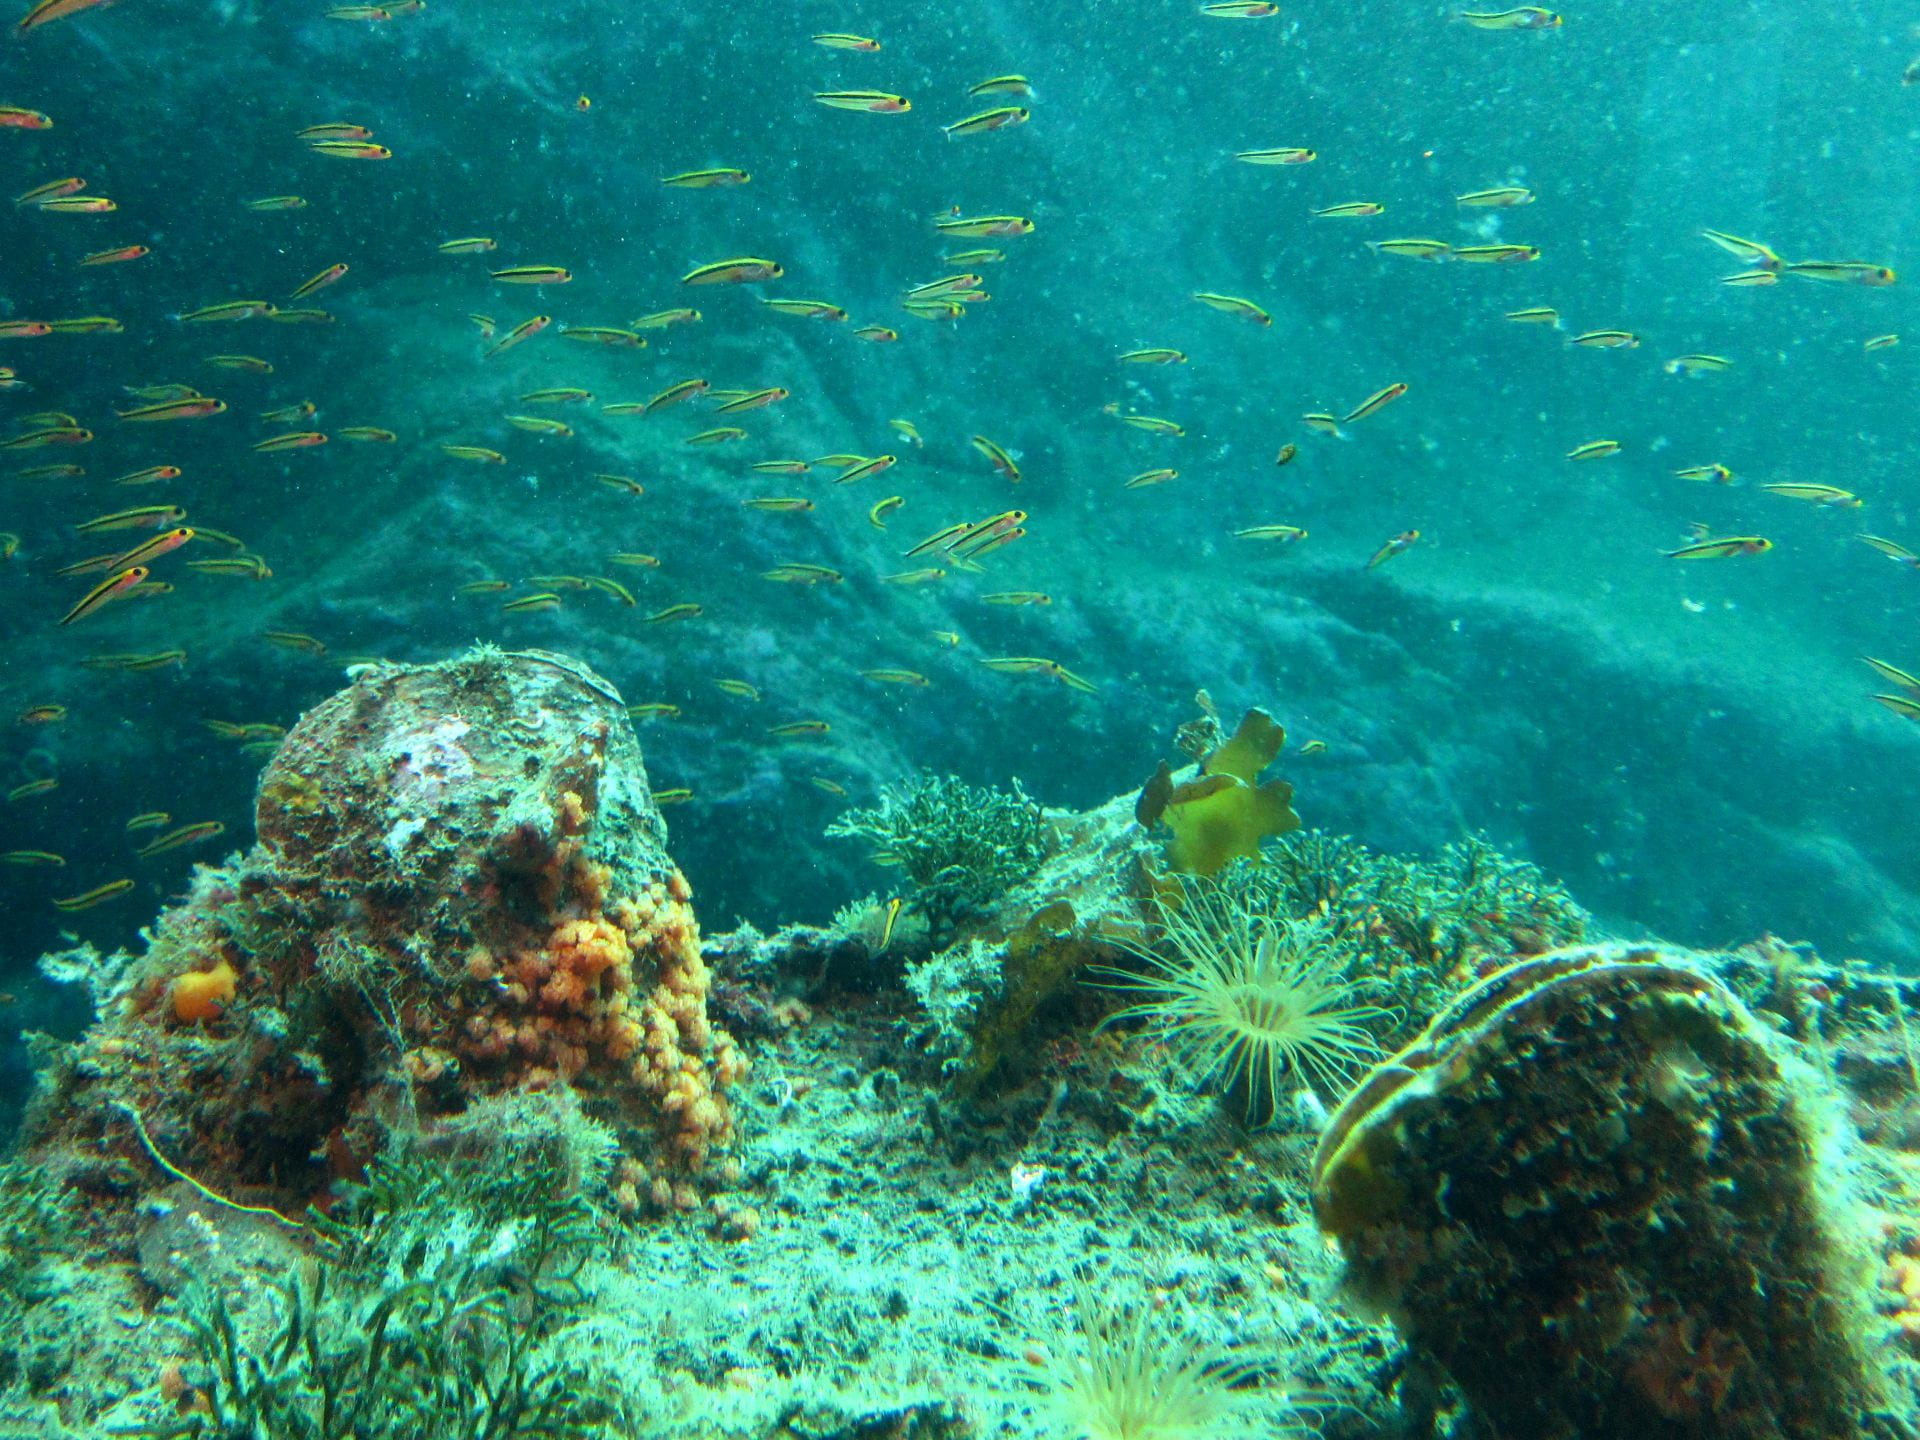 An underwater scene with a school of bright fish above rocks encrusted with orange anemones